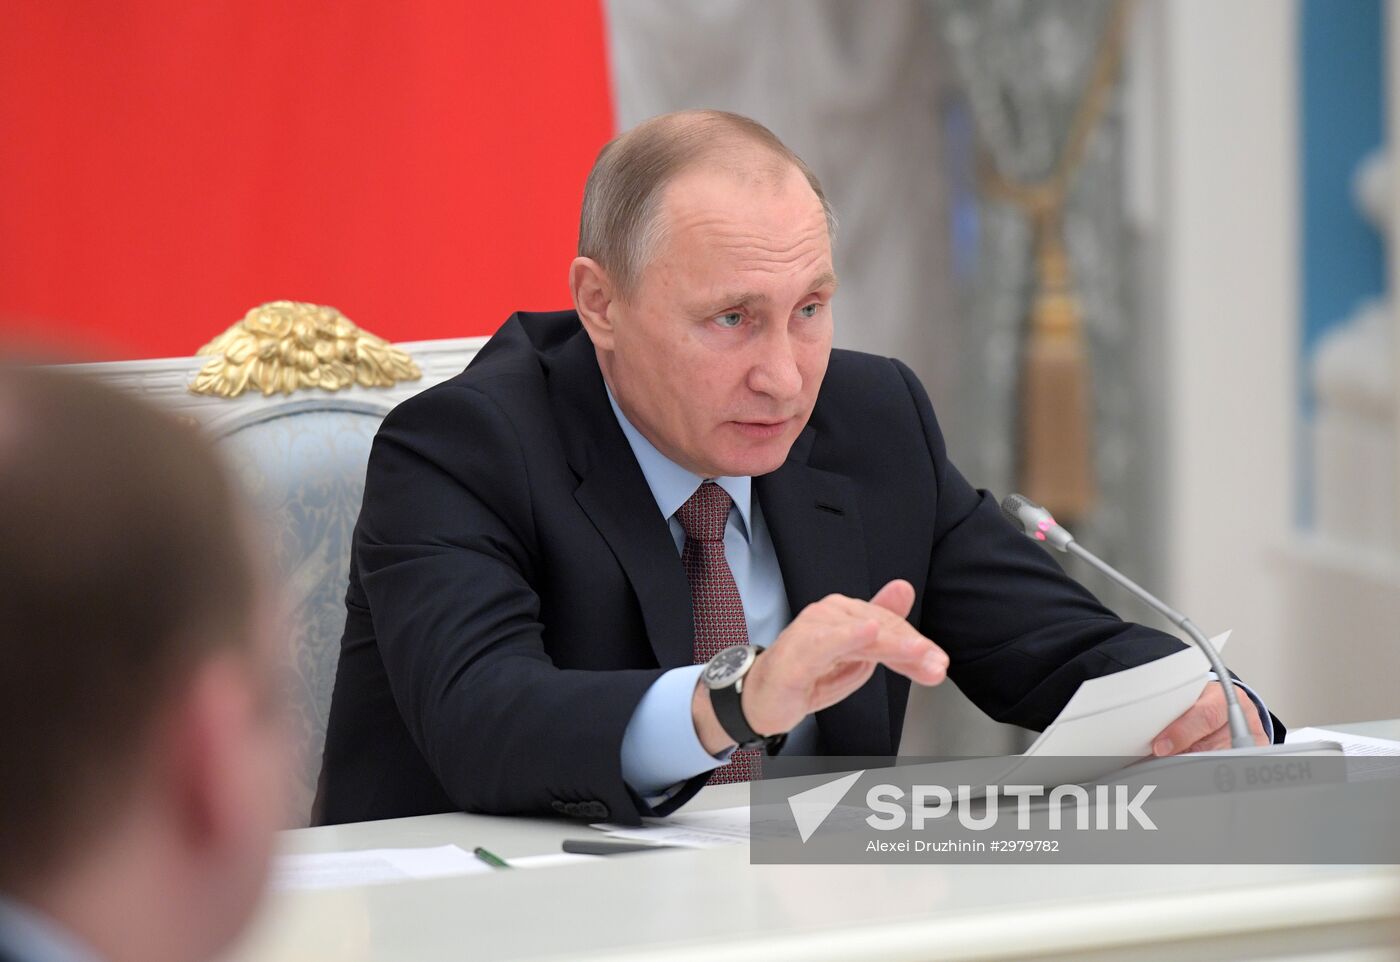 President Putin chairs a meeting of the Council for Strategic Development and Priority Projects